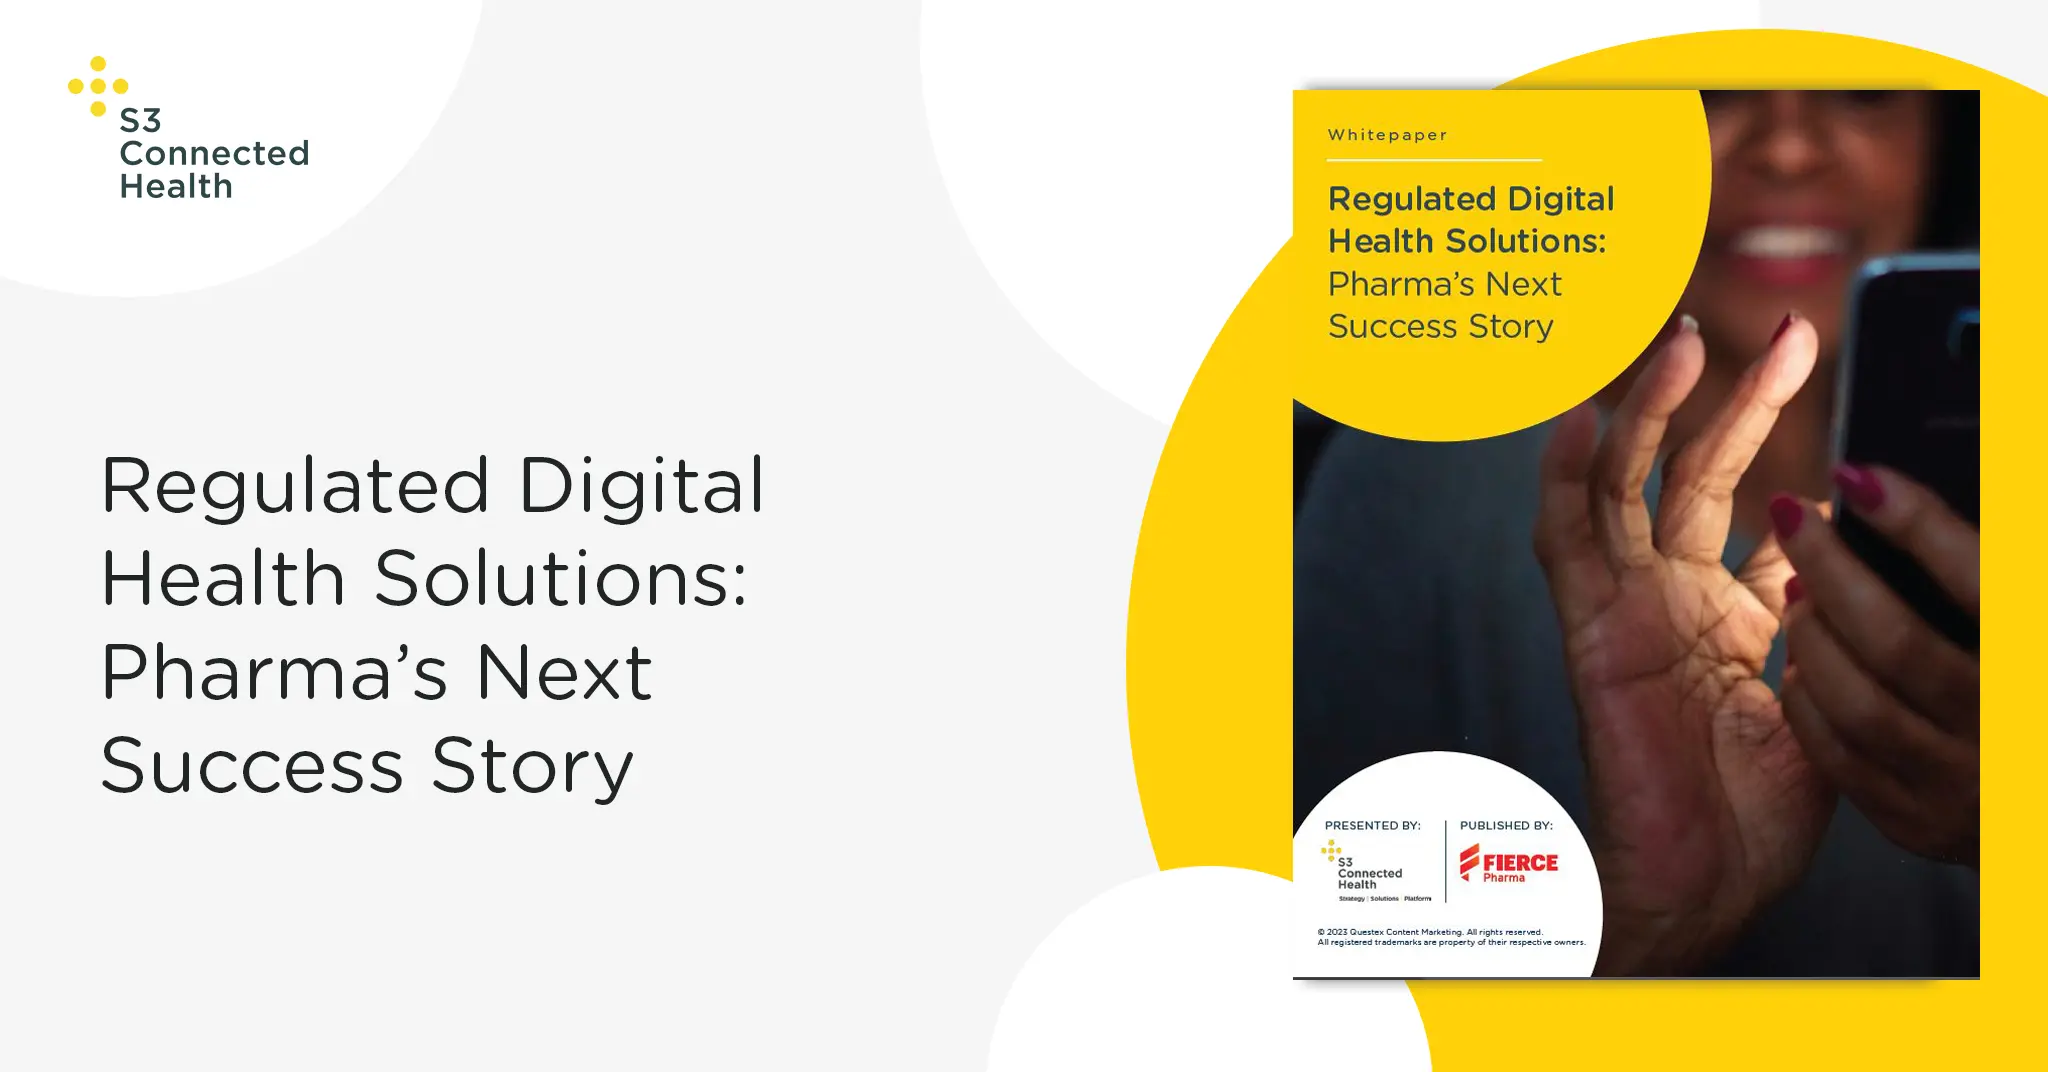 Whitepaper Release: Regulated Digital Health Solutions: Pharma's Next Success Story